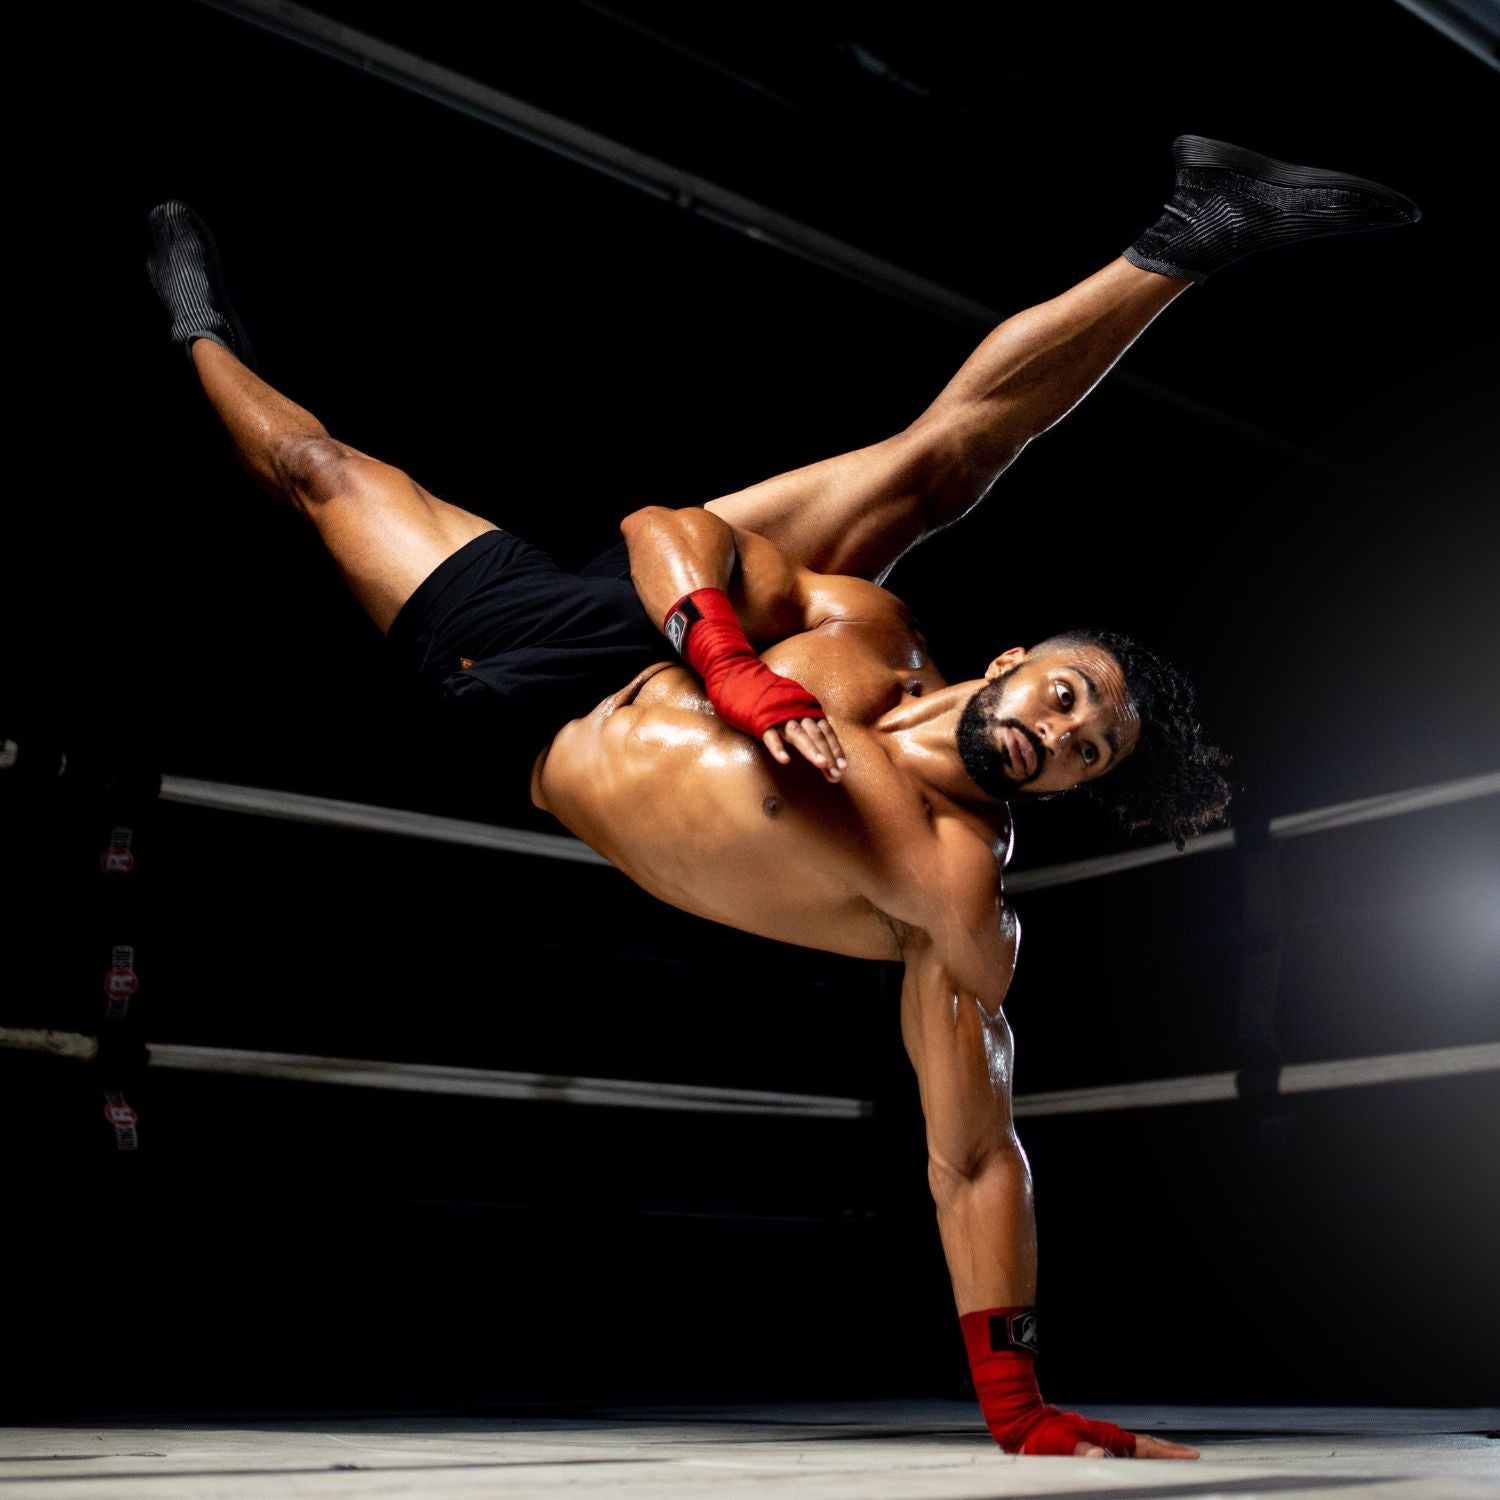 A Fitness athlete performing an acrobatic handstand in a boxing ring